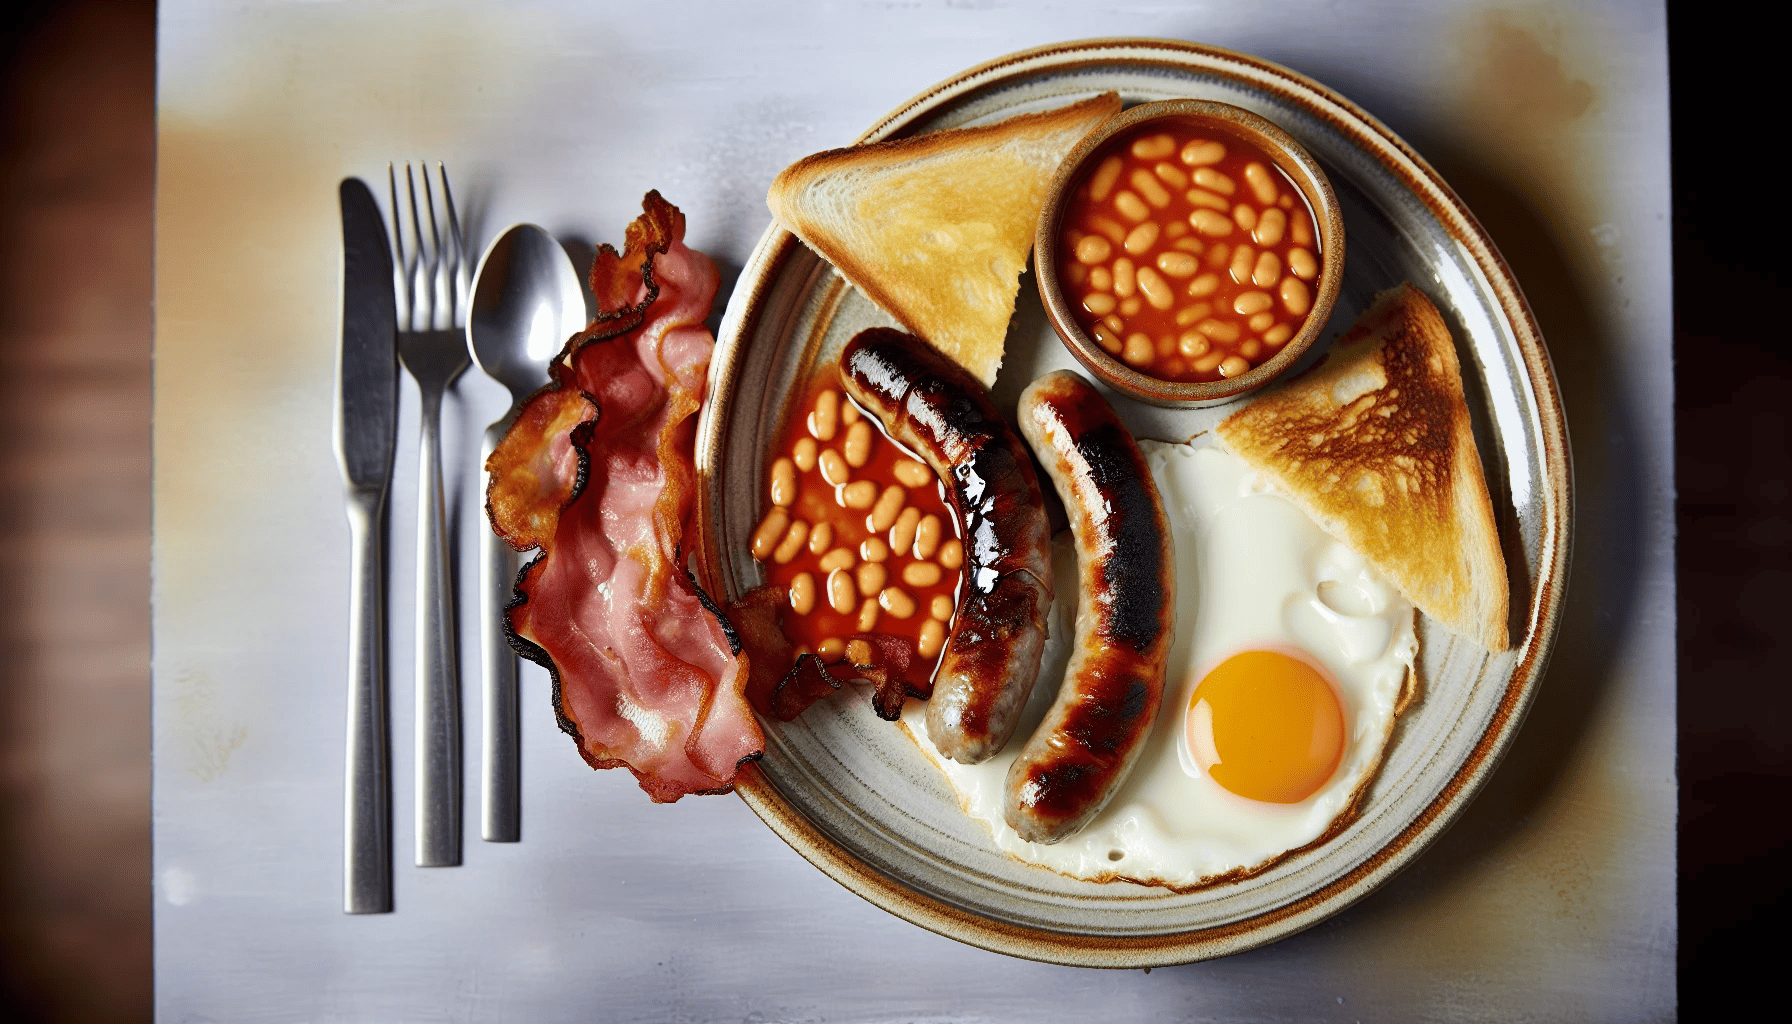 A full Irish breakfast with bacon, sausages, eggs, and baked beans